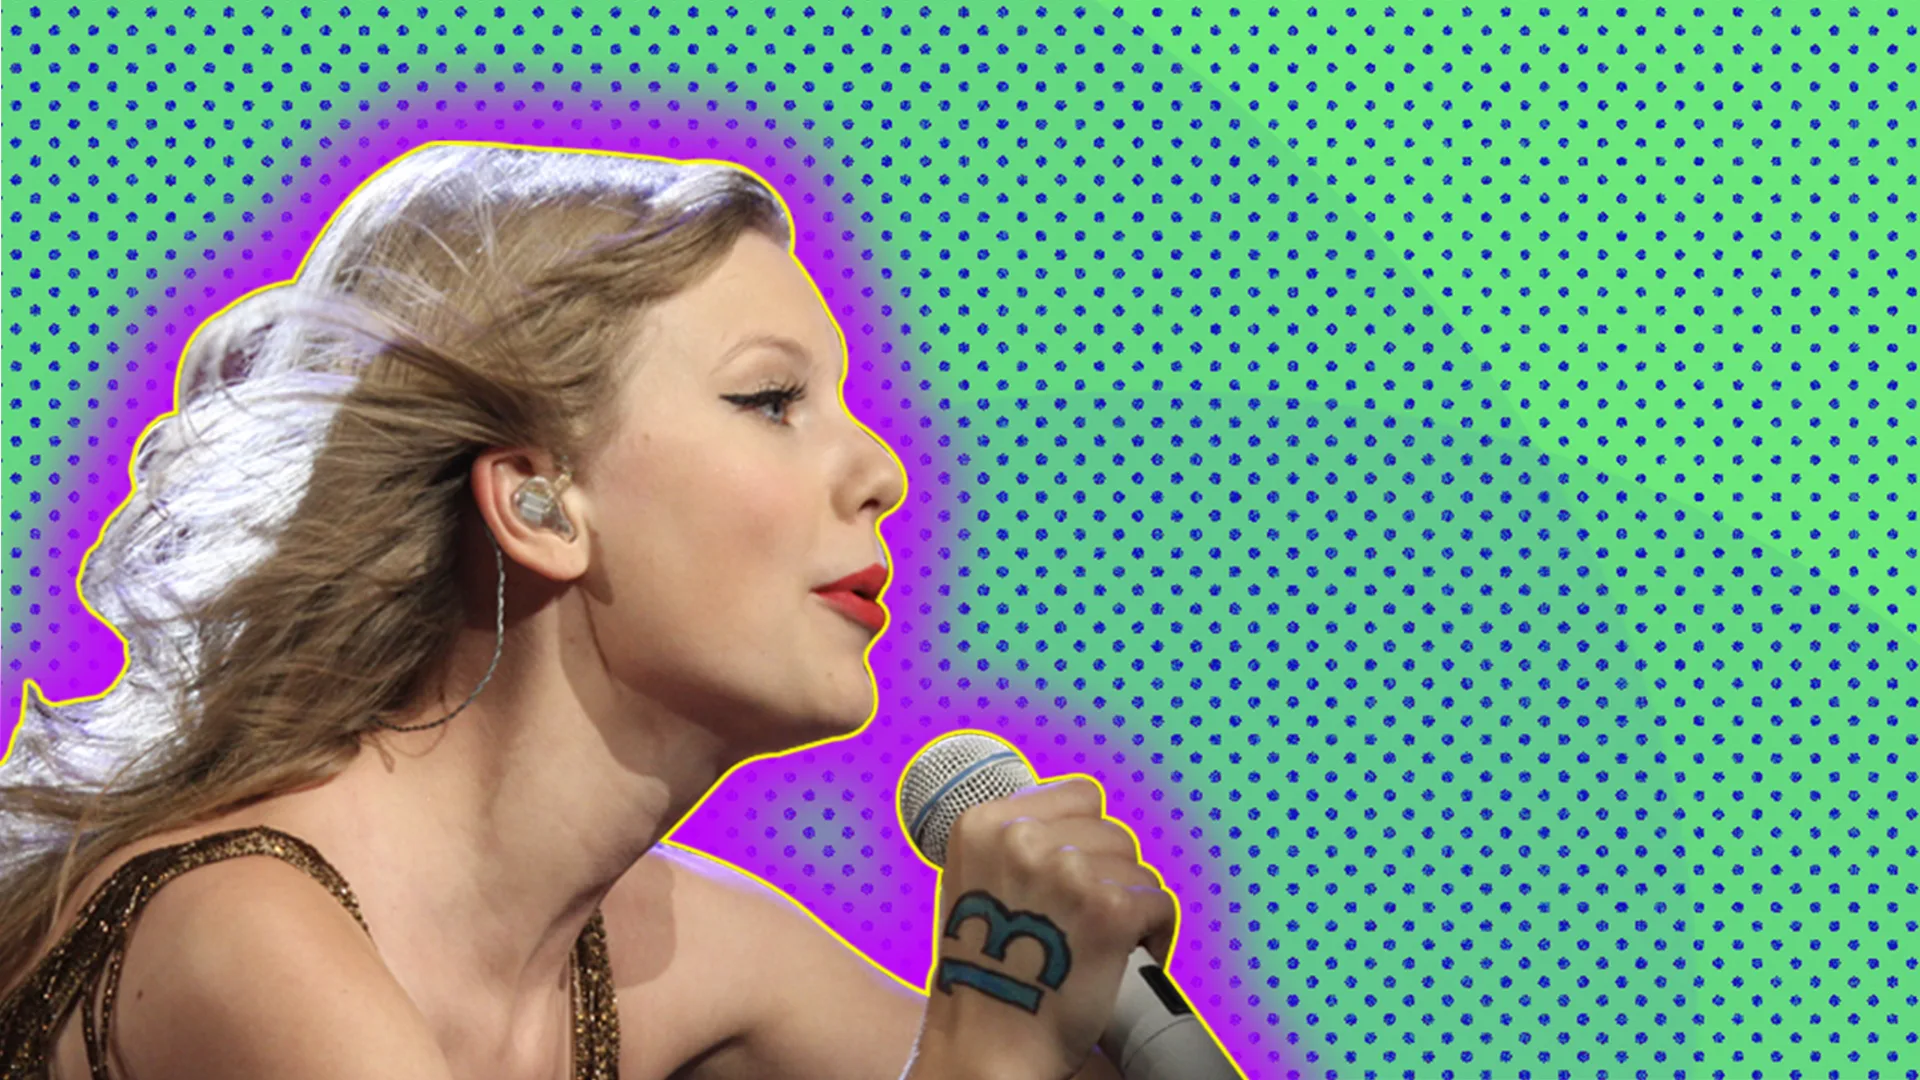 Taylor Swift singing live - in graphic house style